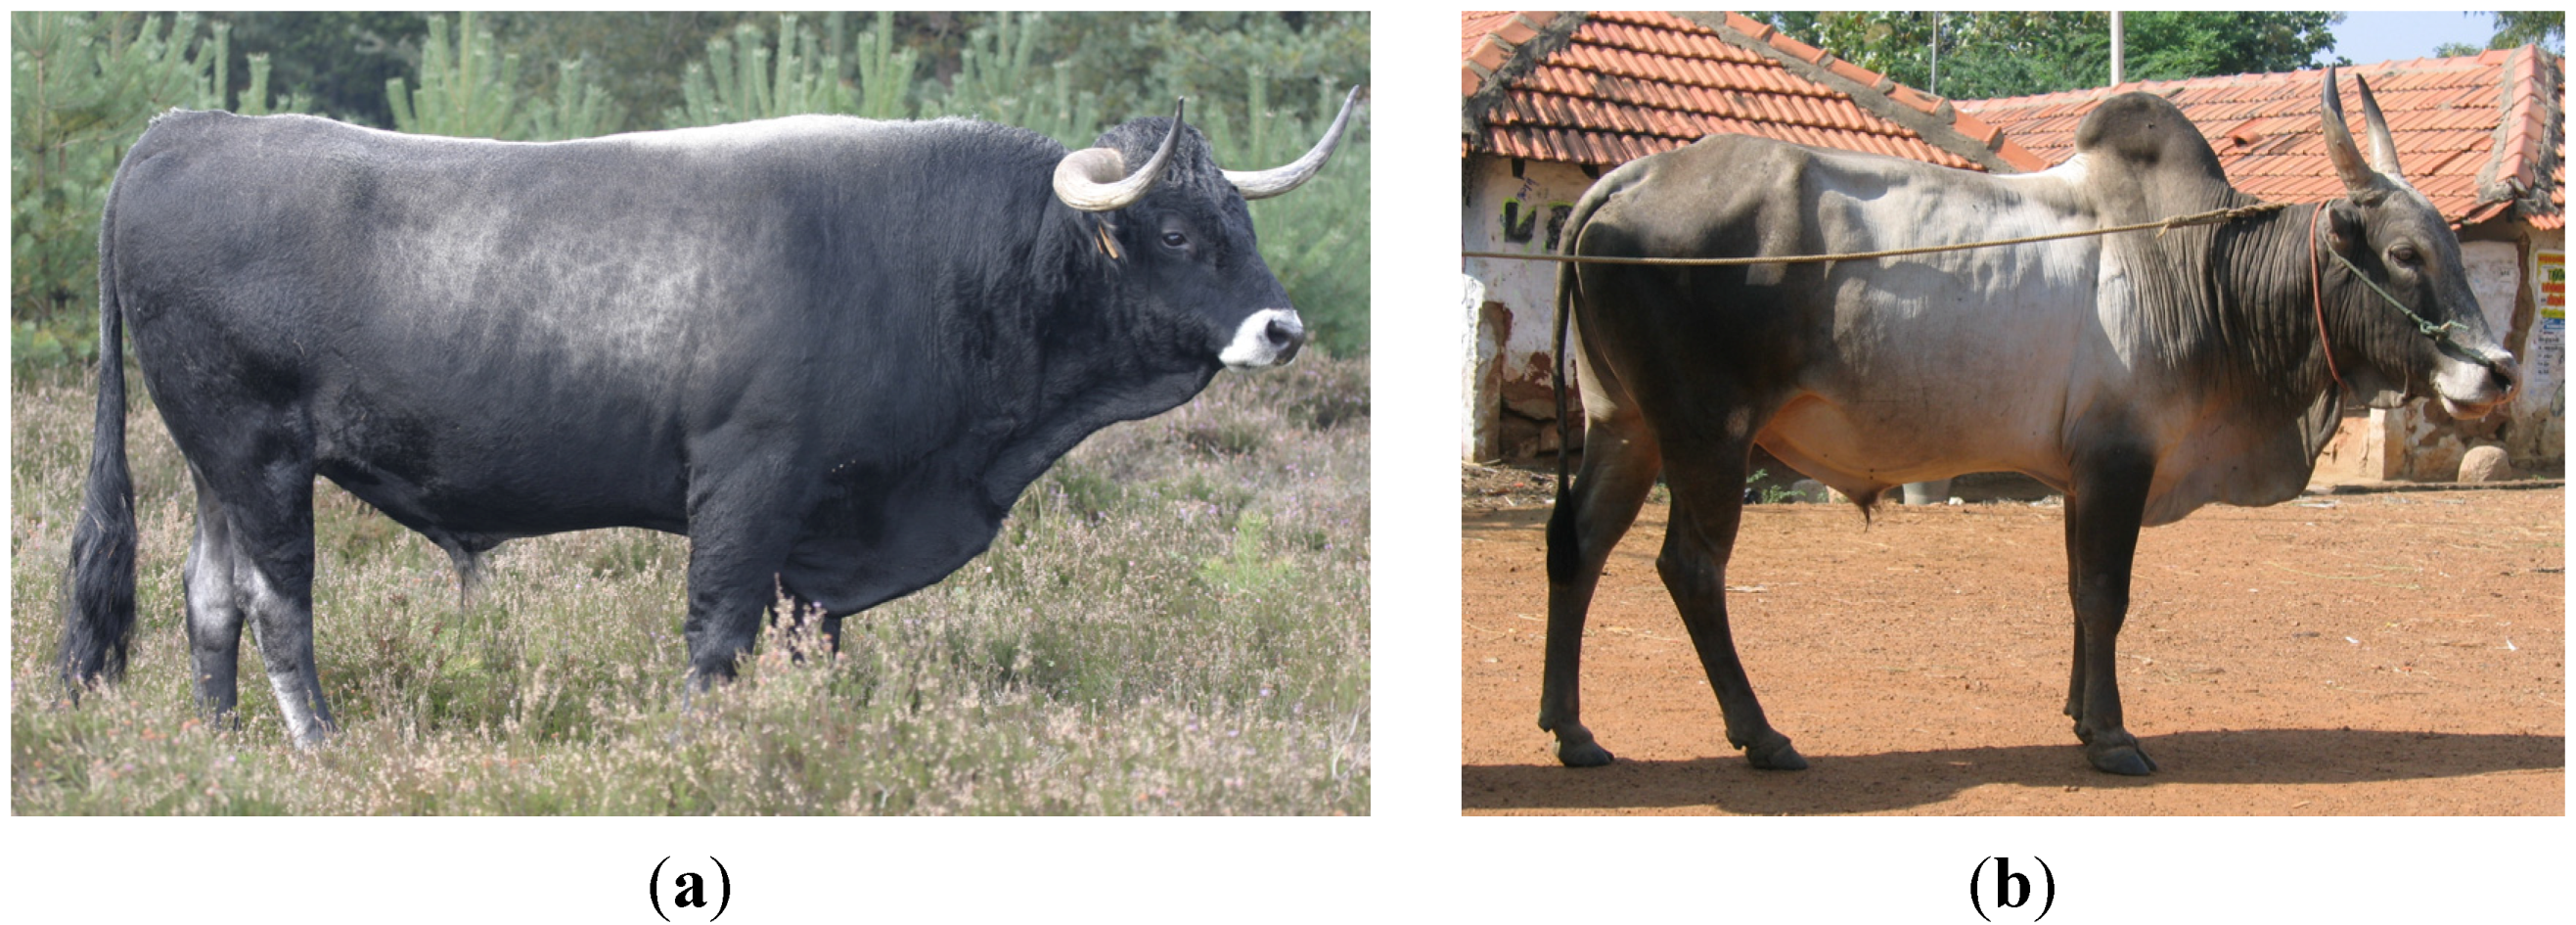 Diversity | Free Full-Text | On the History of Cattle Genetic Resources